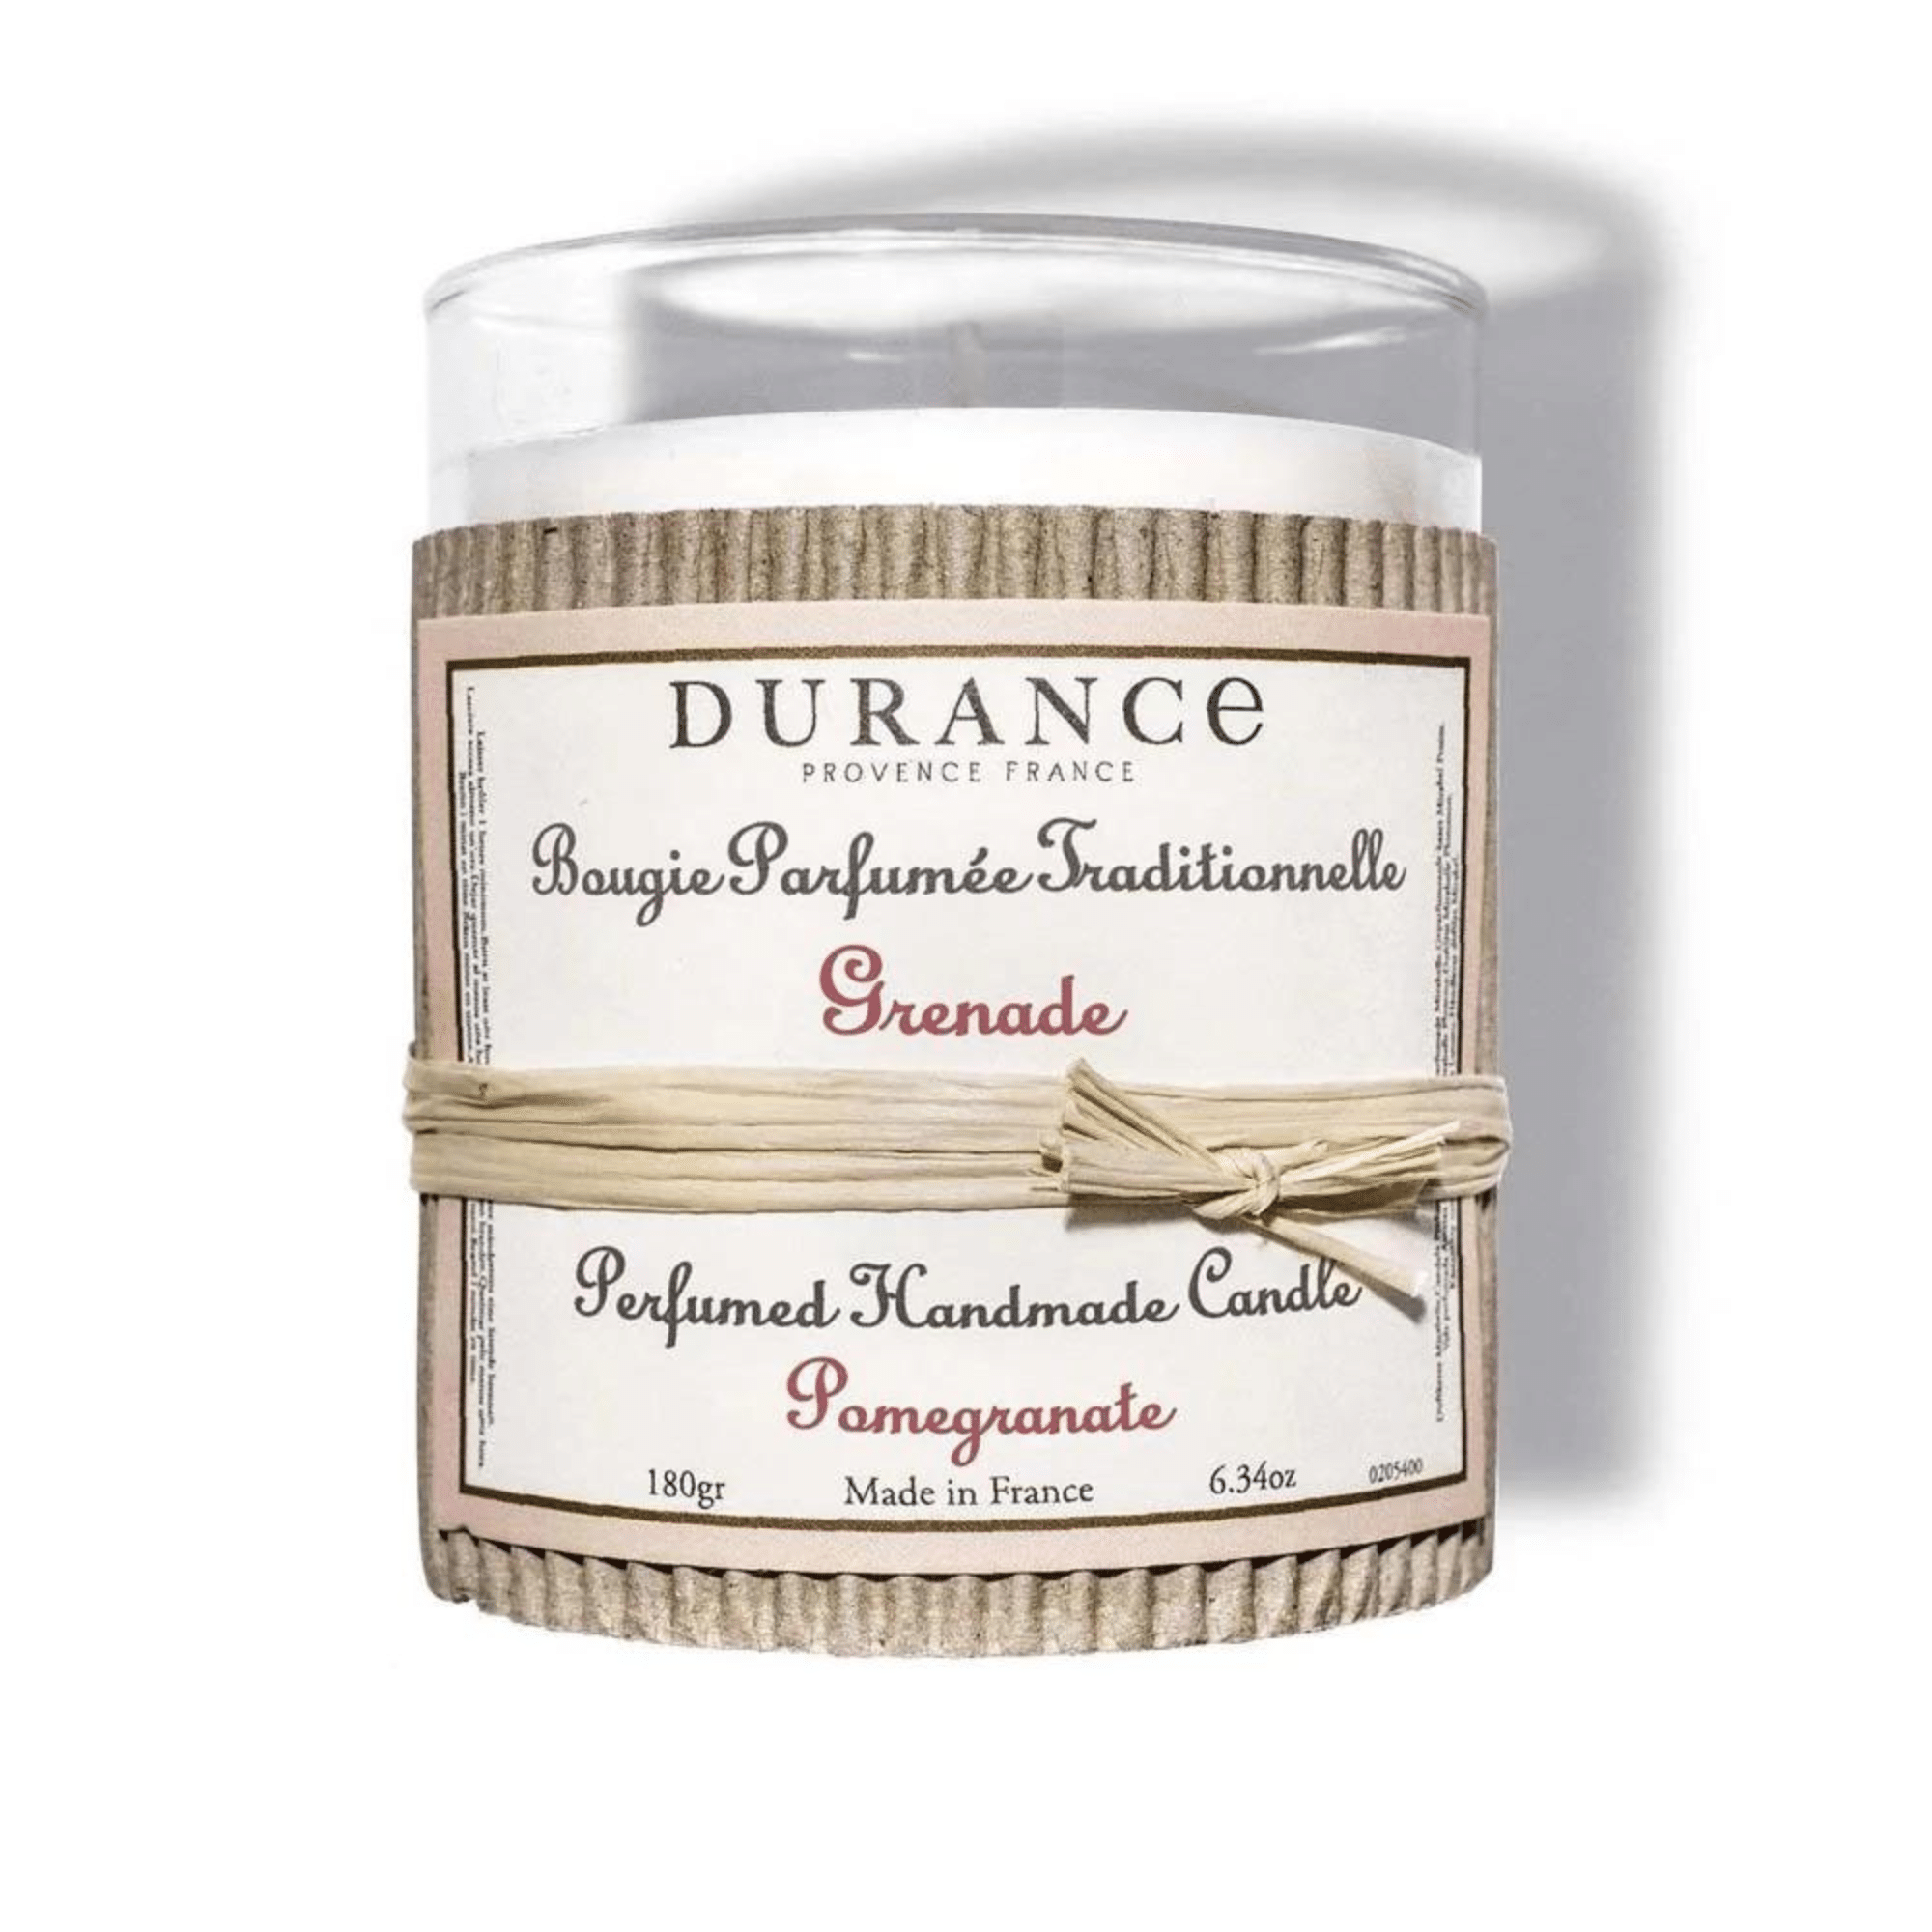 Durance Perfumed Handmade Candle Pomegranate